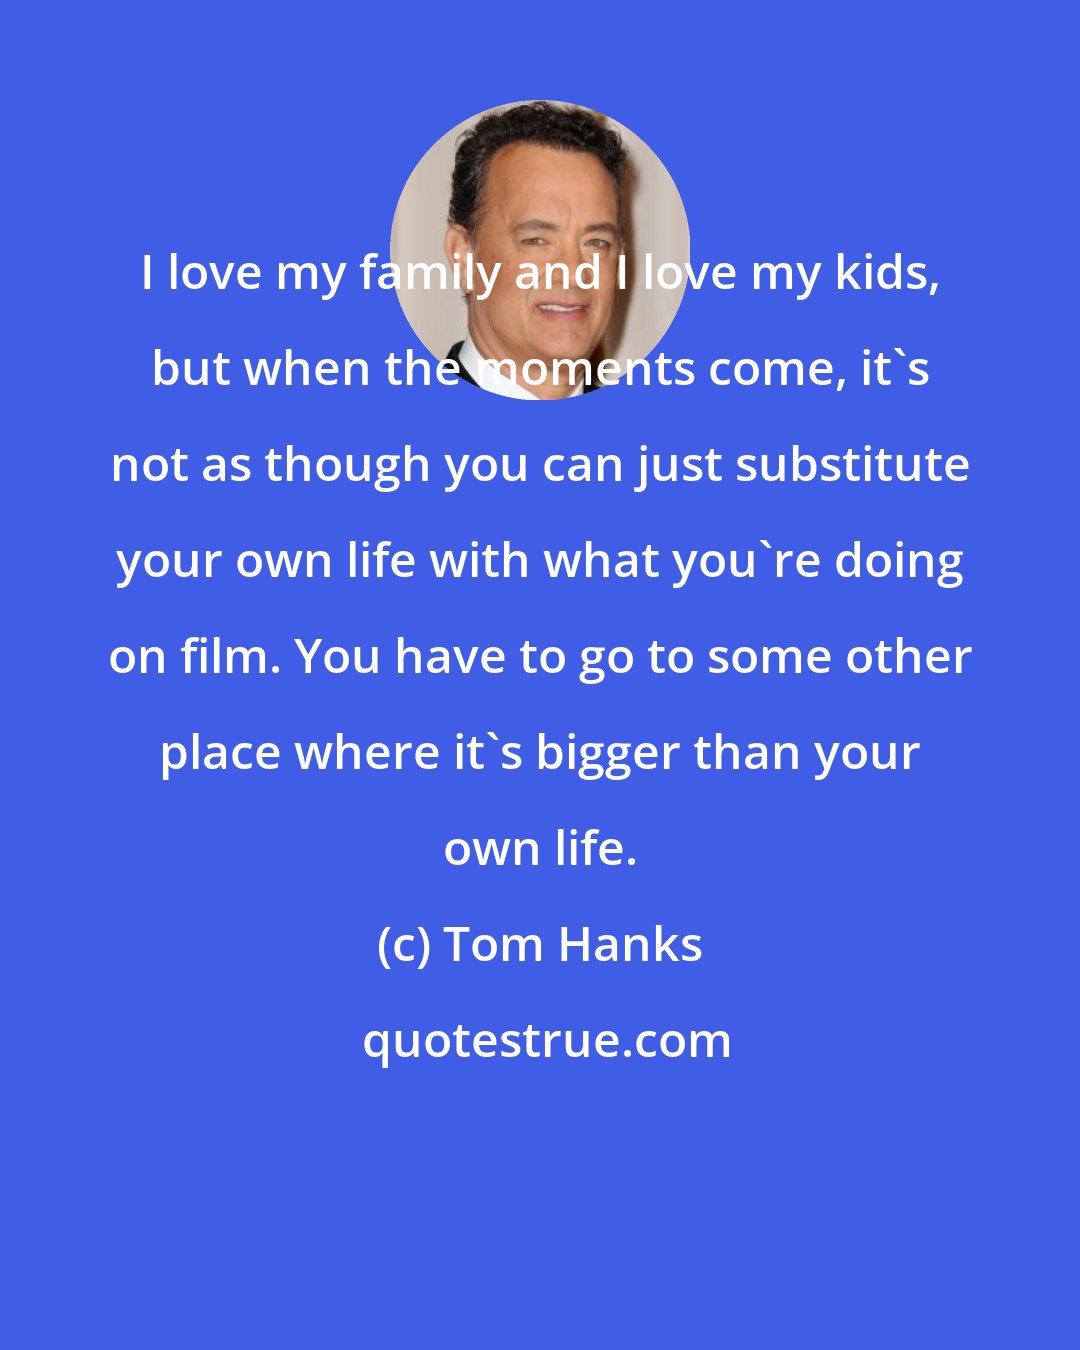 Tom Hanks: I love my family and I love my kids, but when the moments come, it's not as though you can just substitute your own life with what you're doing on film. You have to go to some other place where it's bigger than your own life.